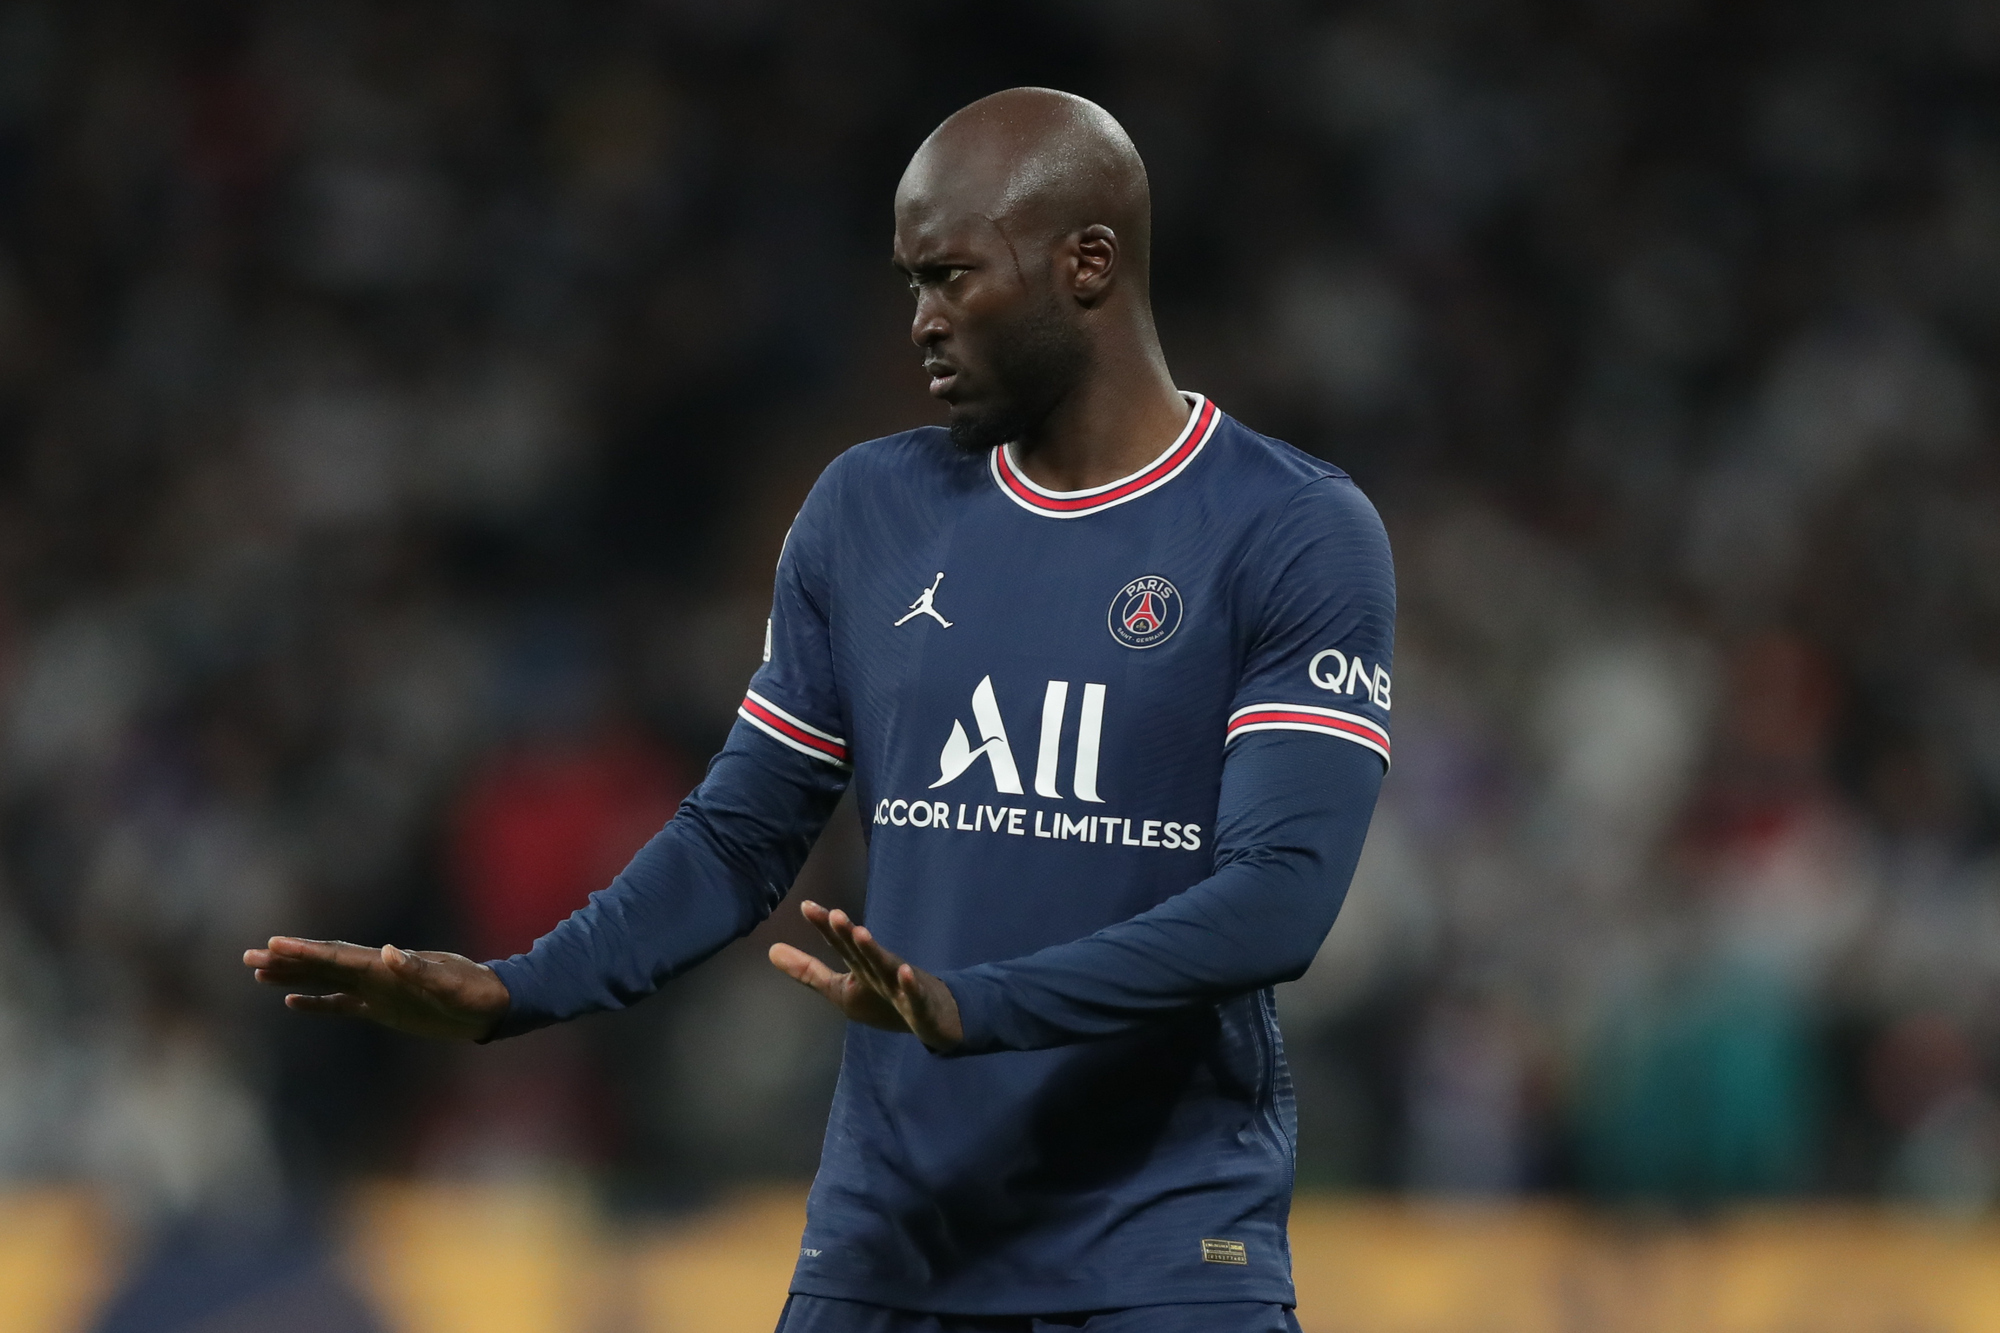 Video: Danilo Pereira Analyzes PSG's 6-1 Victory Over Clermont Foot